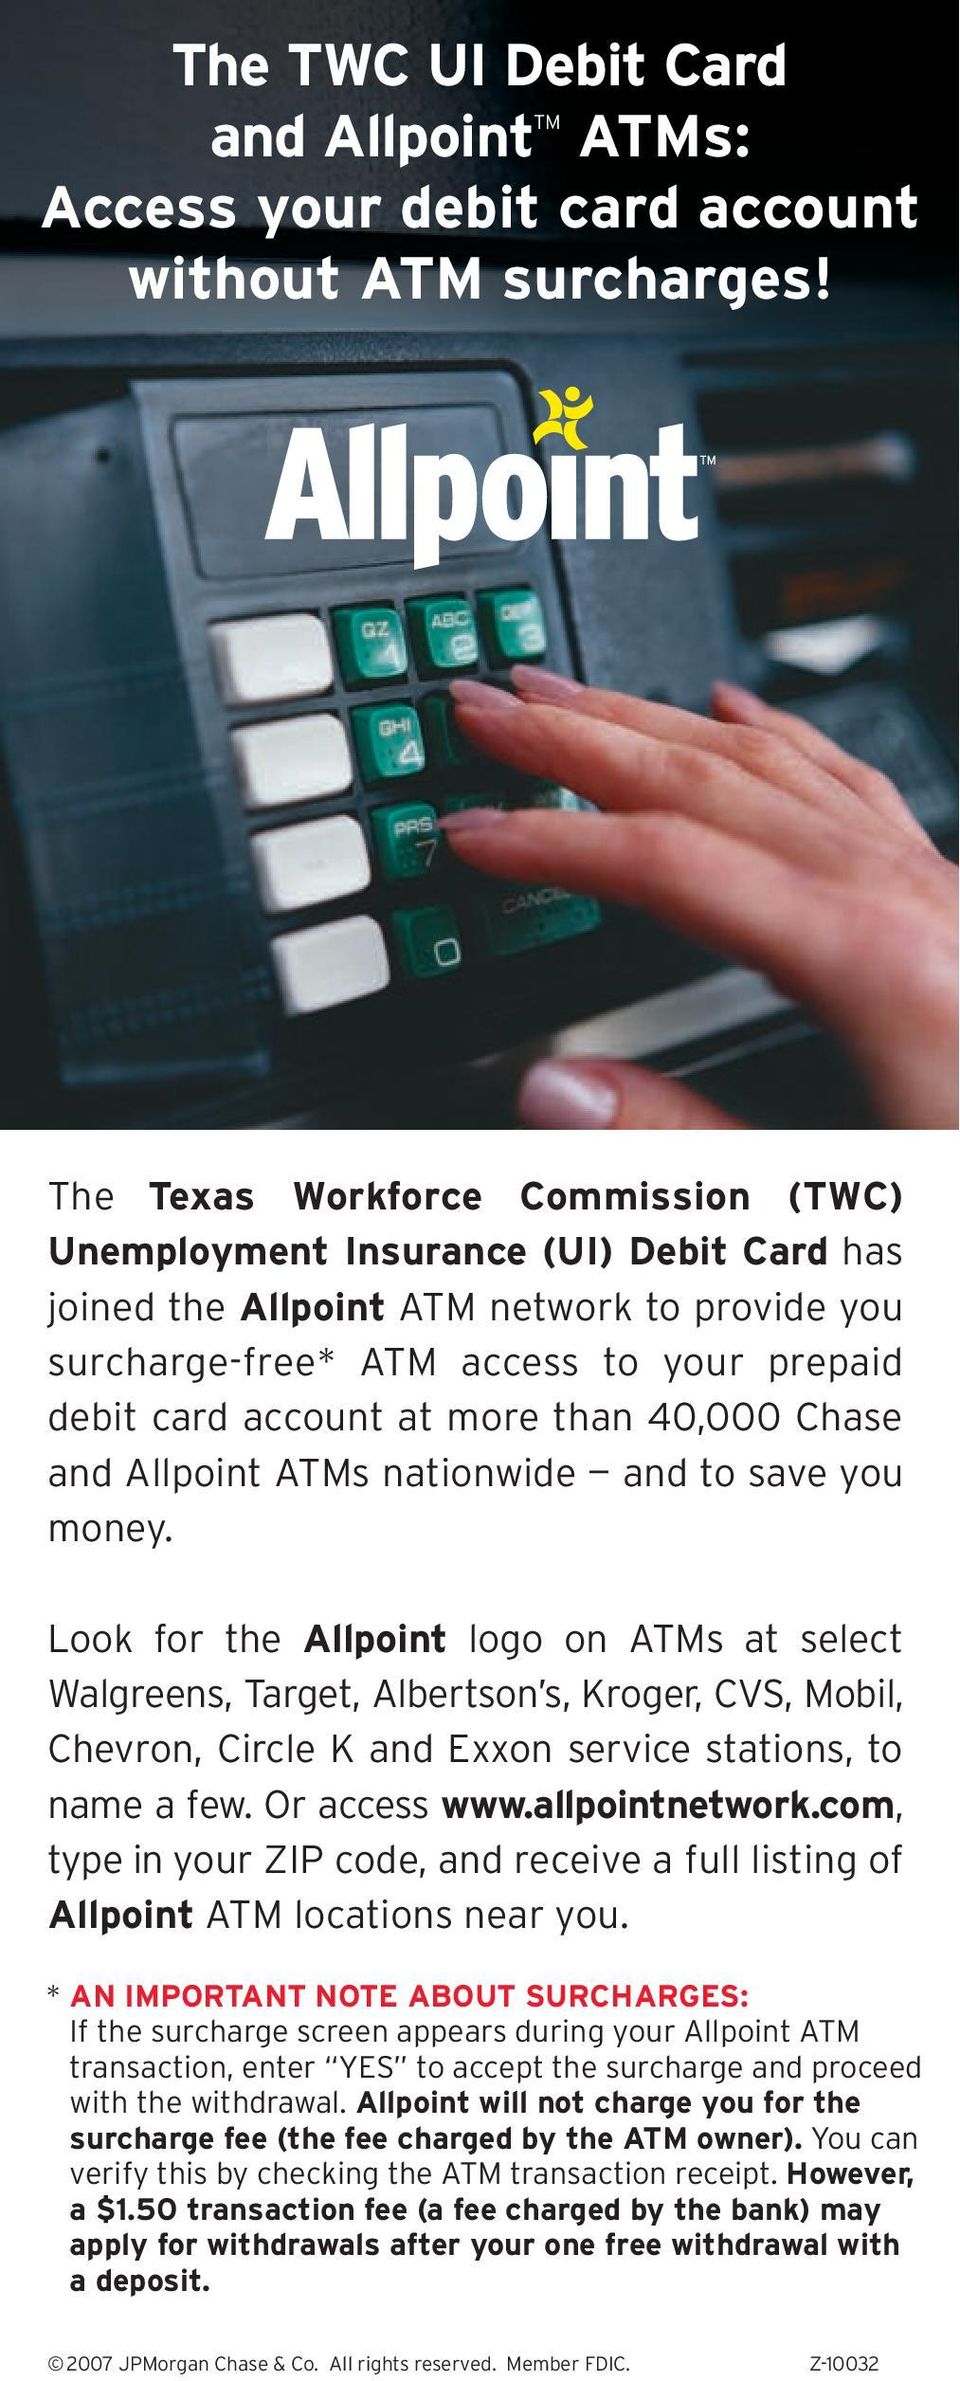 than 40,000 Chase and Allpoint ATMs nationwide and to save you money.